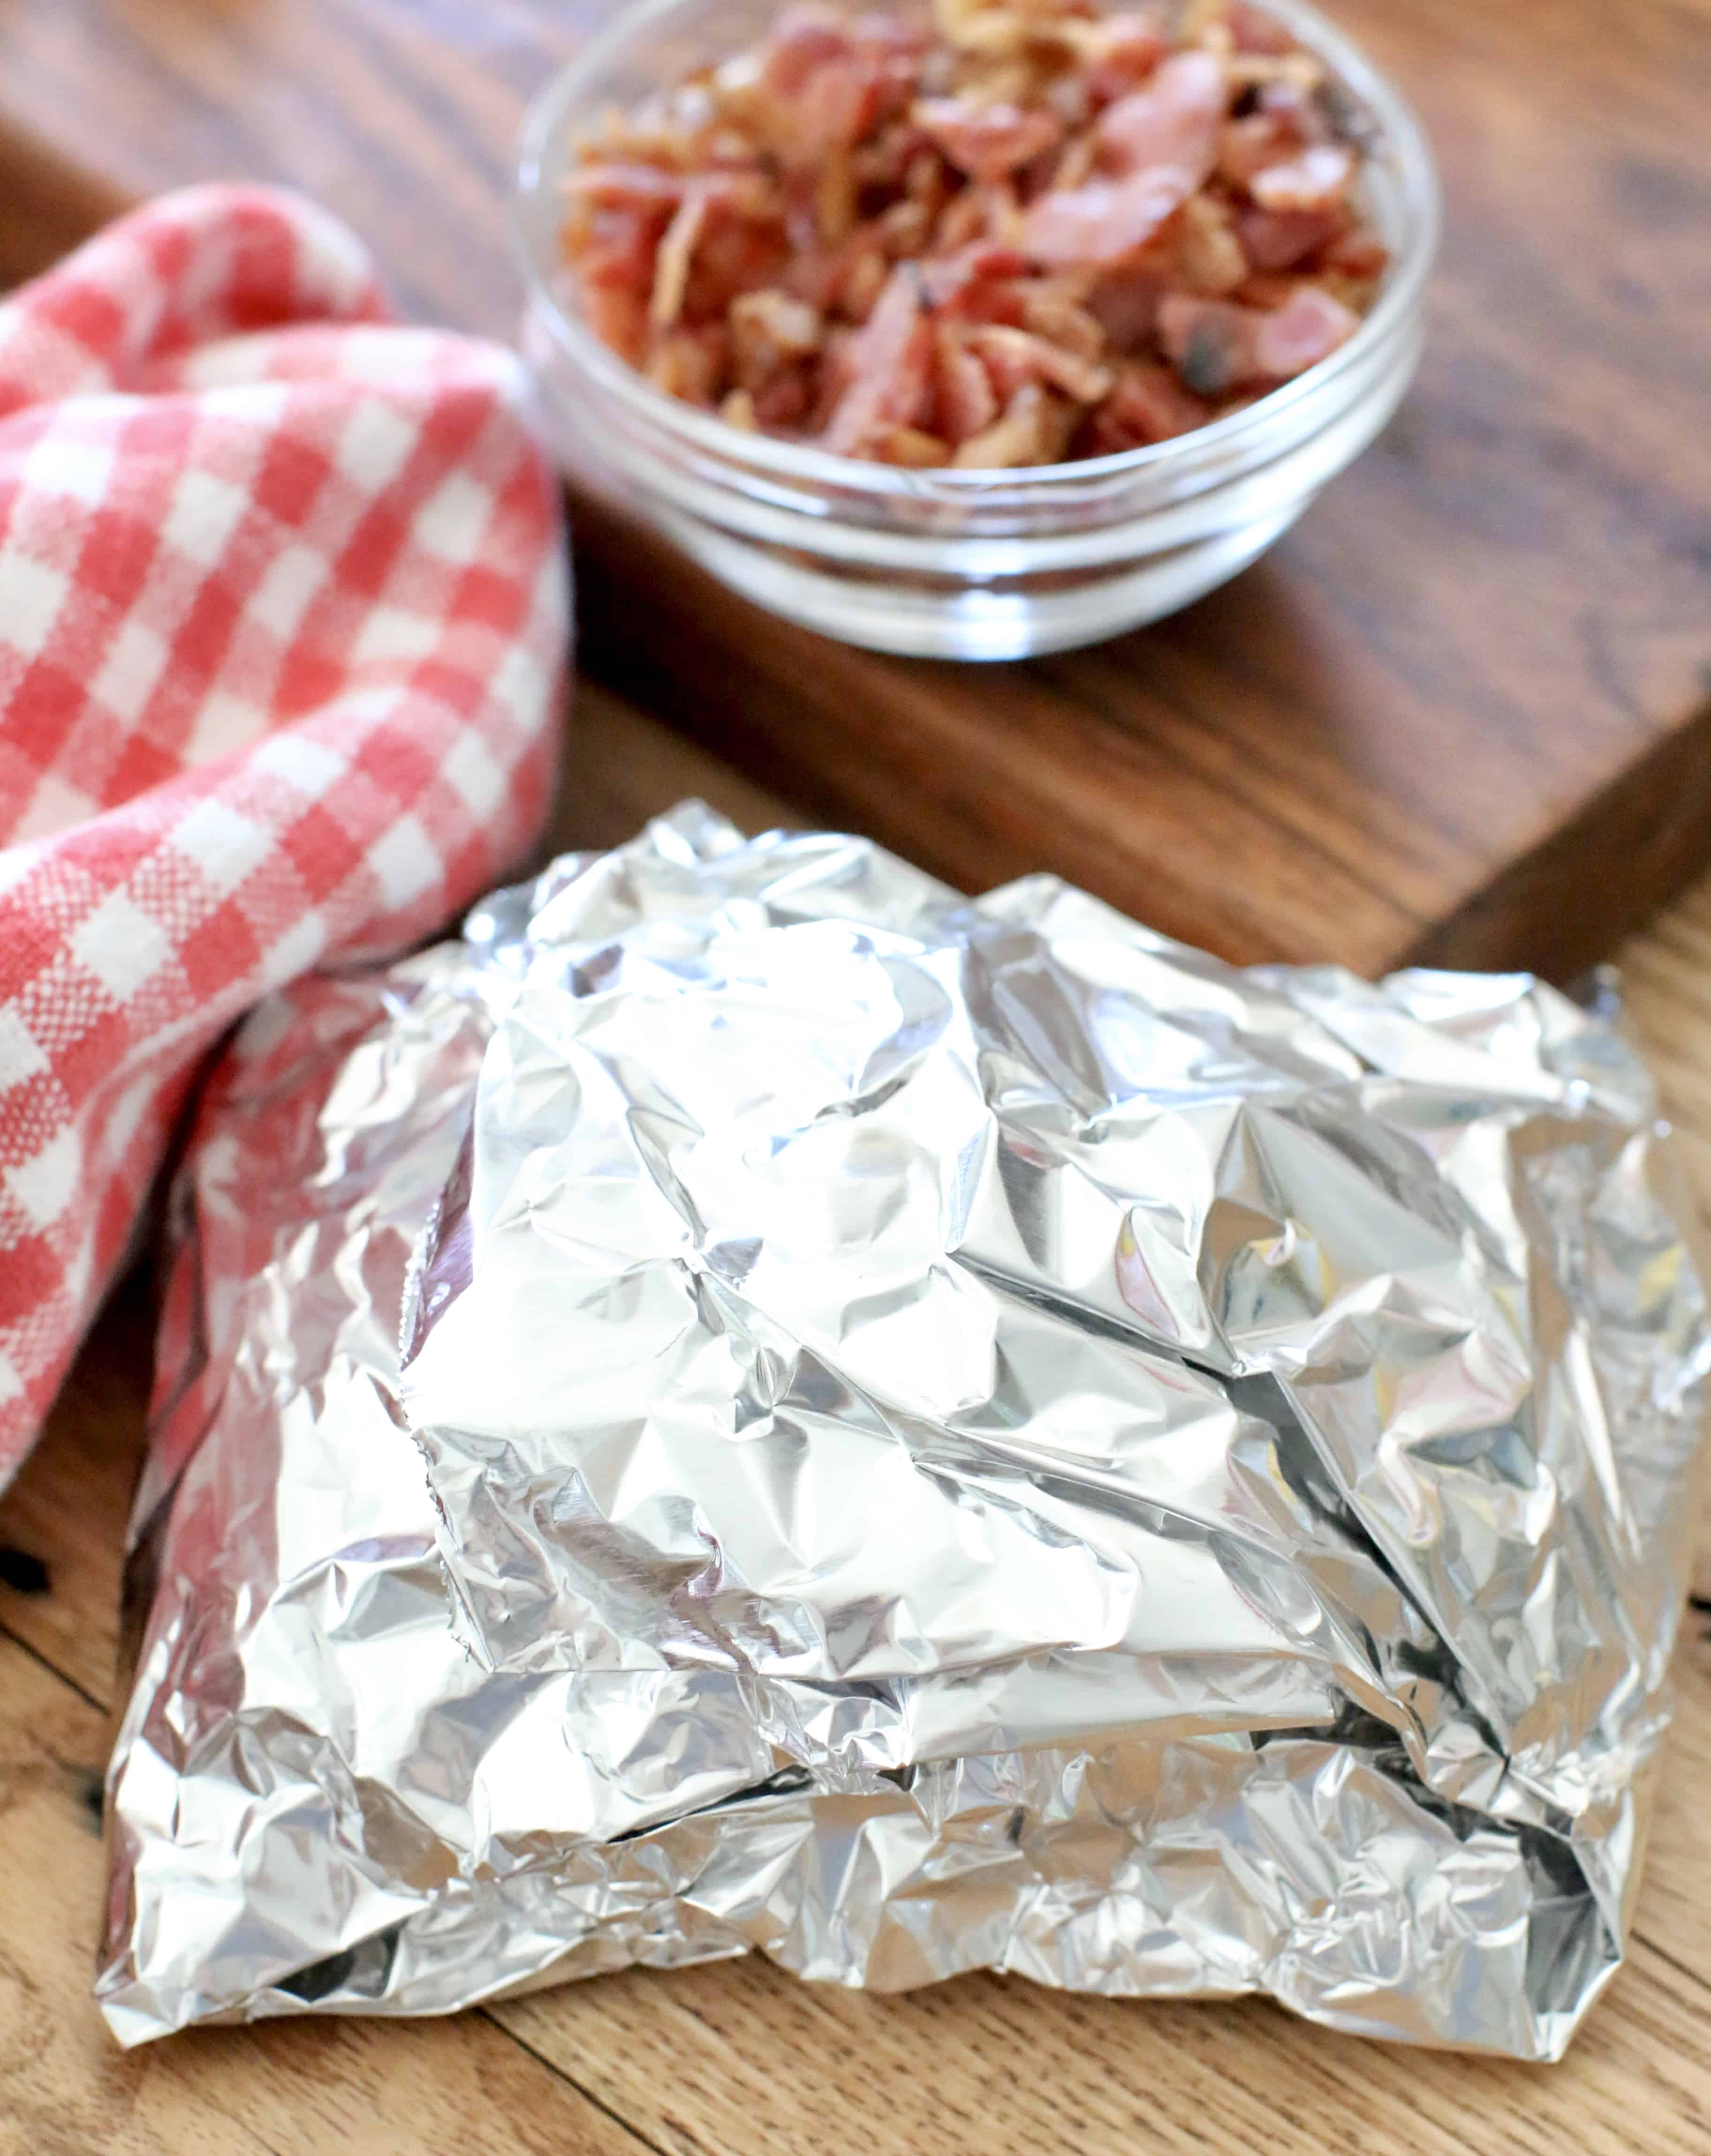 potatoes, cheese and shredded pork BBQ wrapped in aluminum foil.